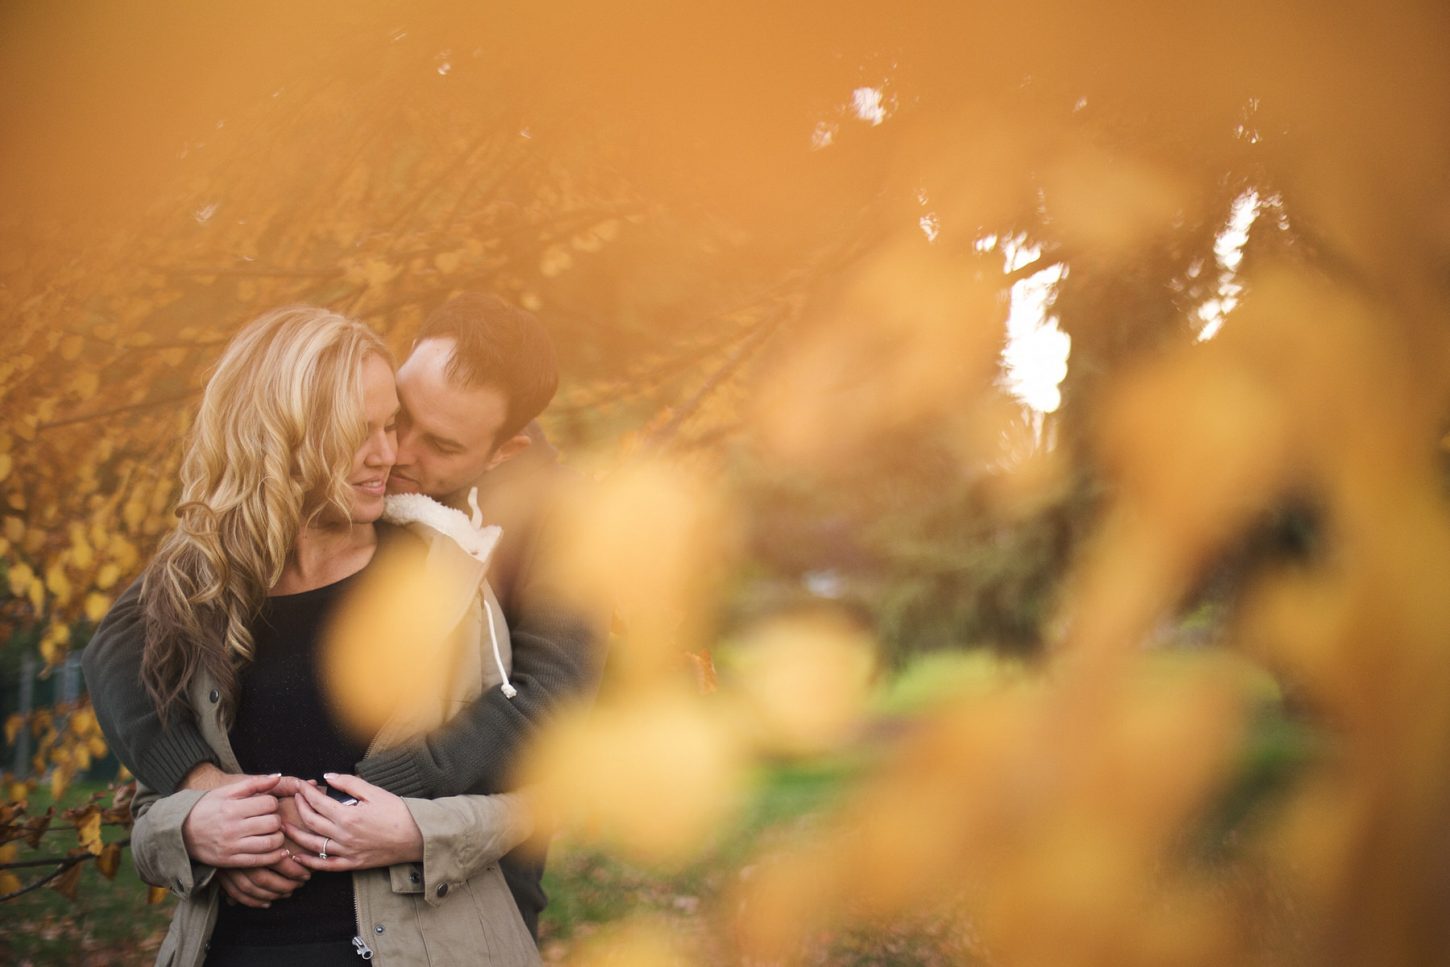 Fall Wedding and Engagement Inspiration